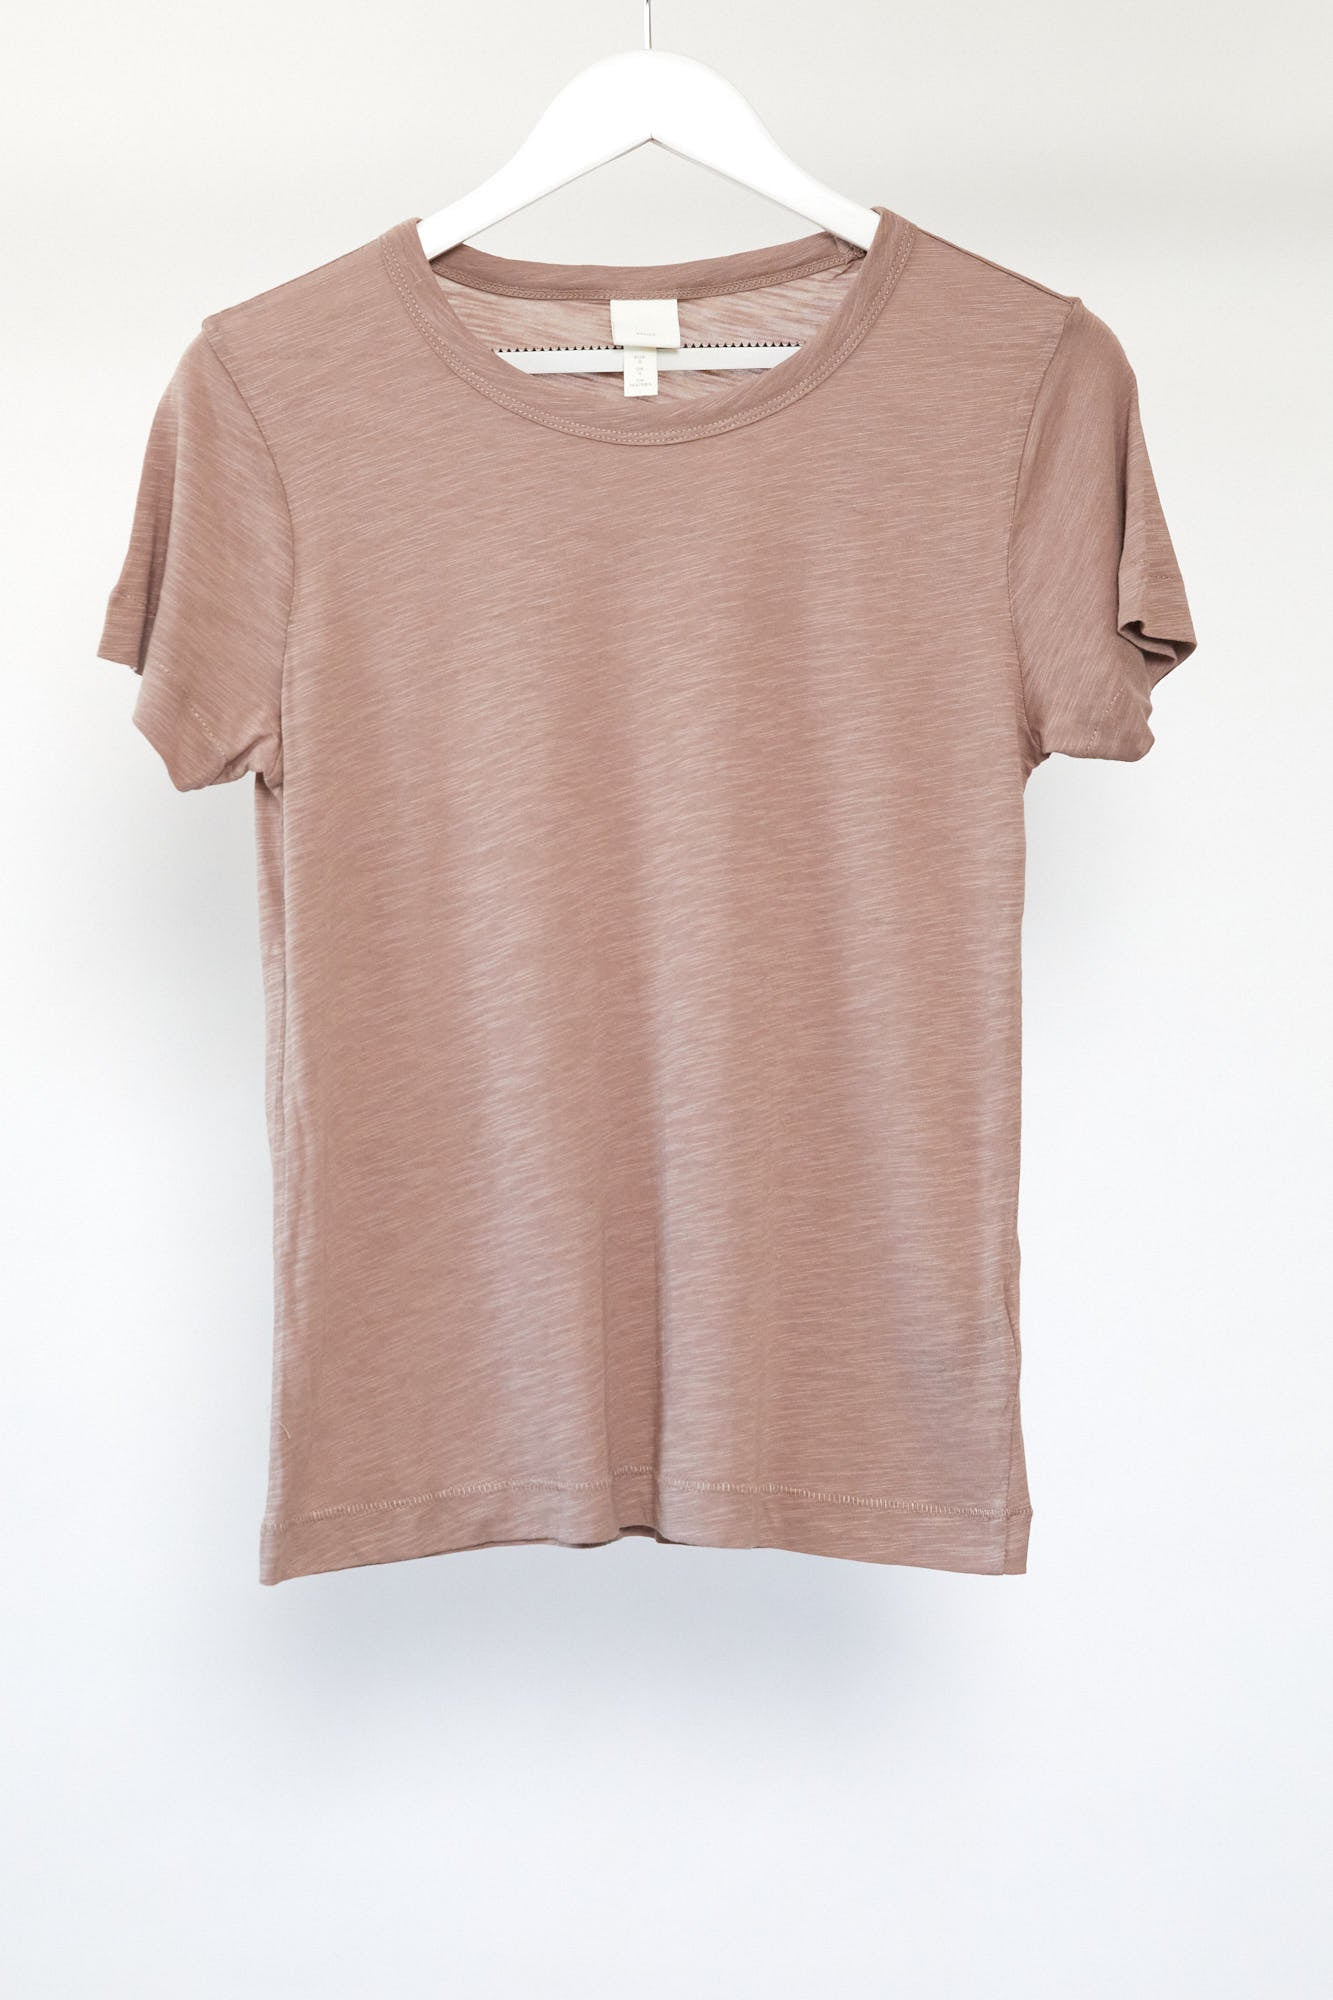 Womens H&M Brown T-shirt size small